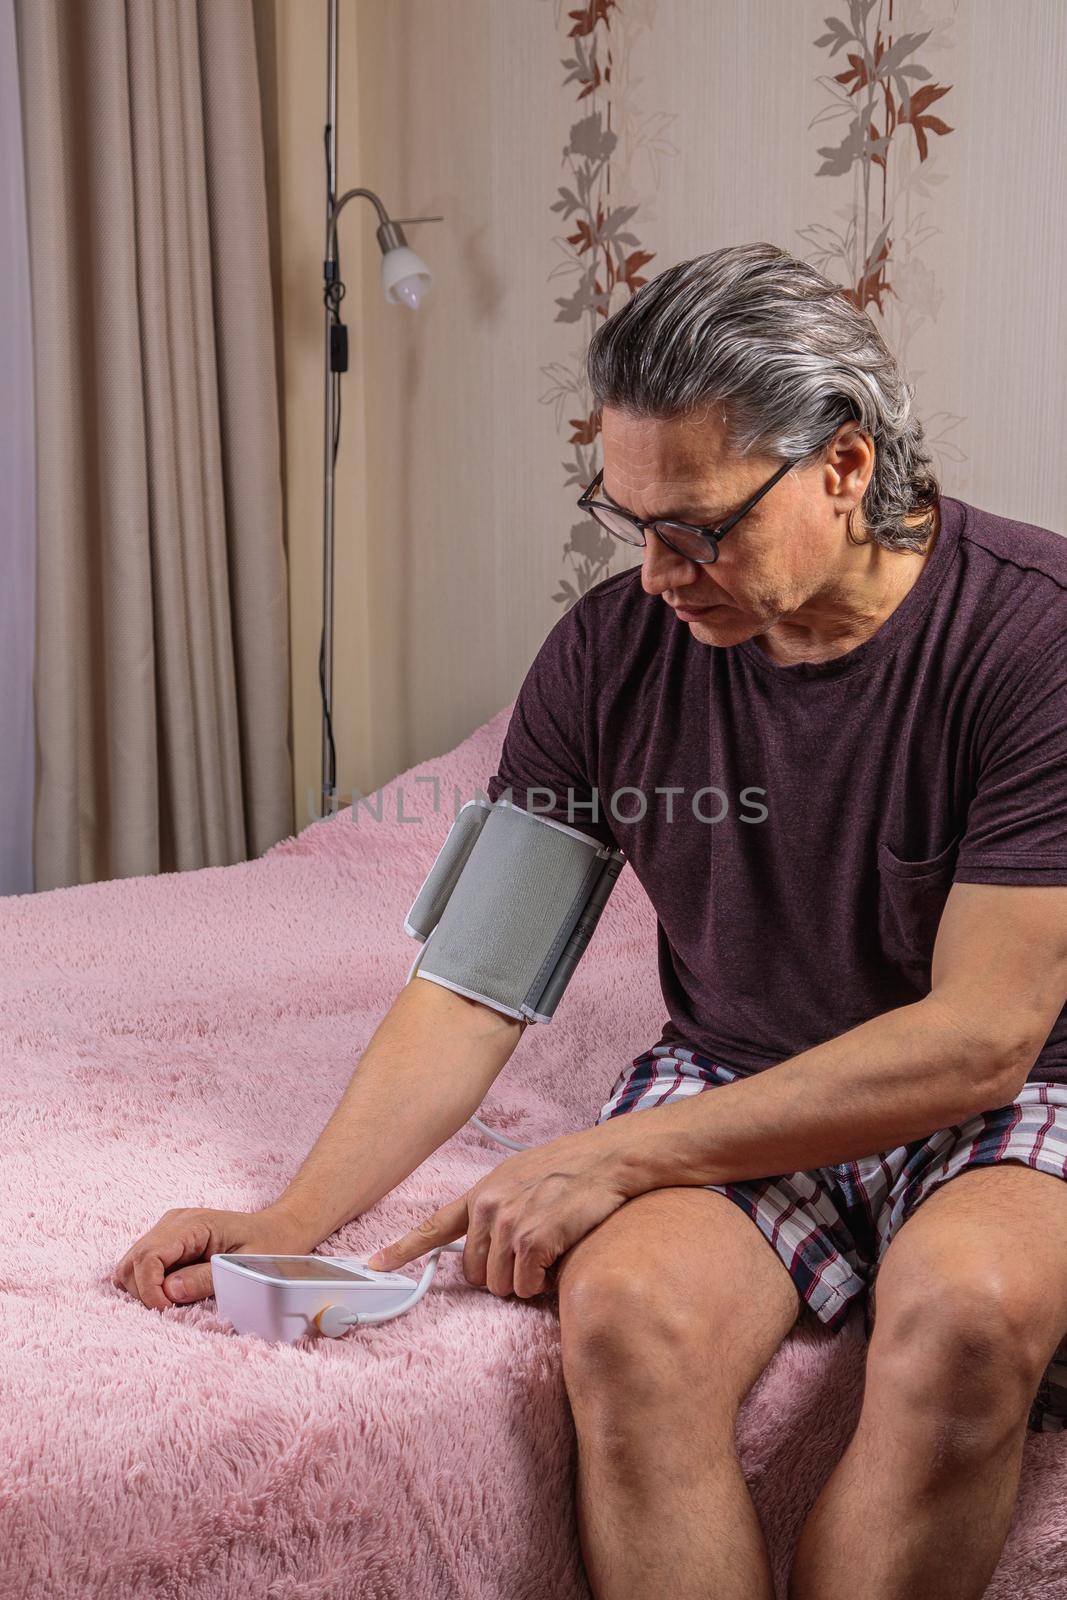 A 50-year-old man measures his blood pressure with a blood pressure monitor at home, sitting on his bed in his home clothes. Surprised by the instrument readings